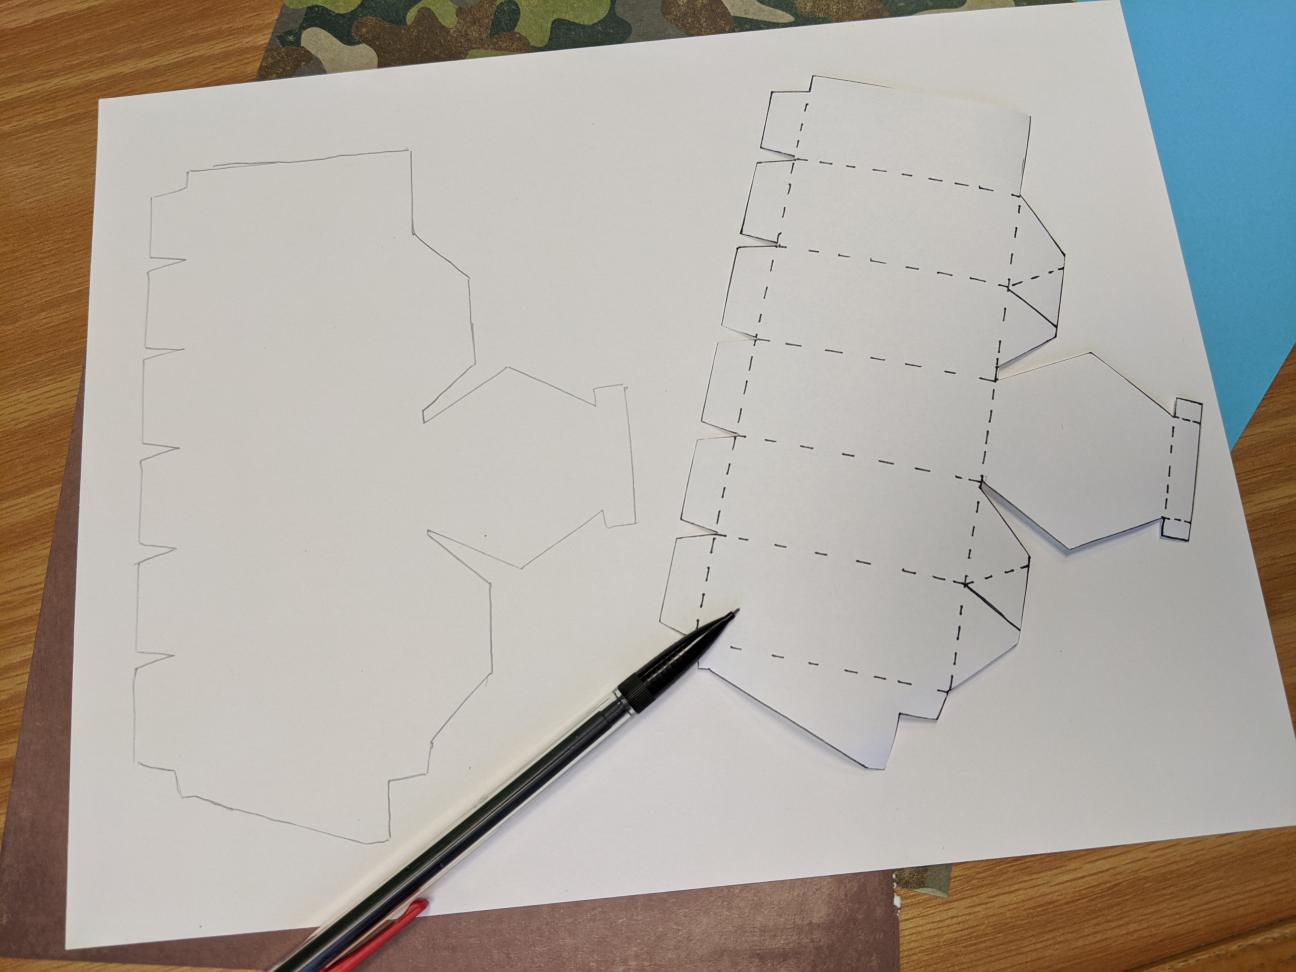 Picture of tracing the pattern onto paper